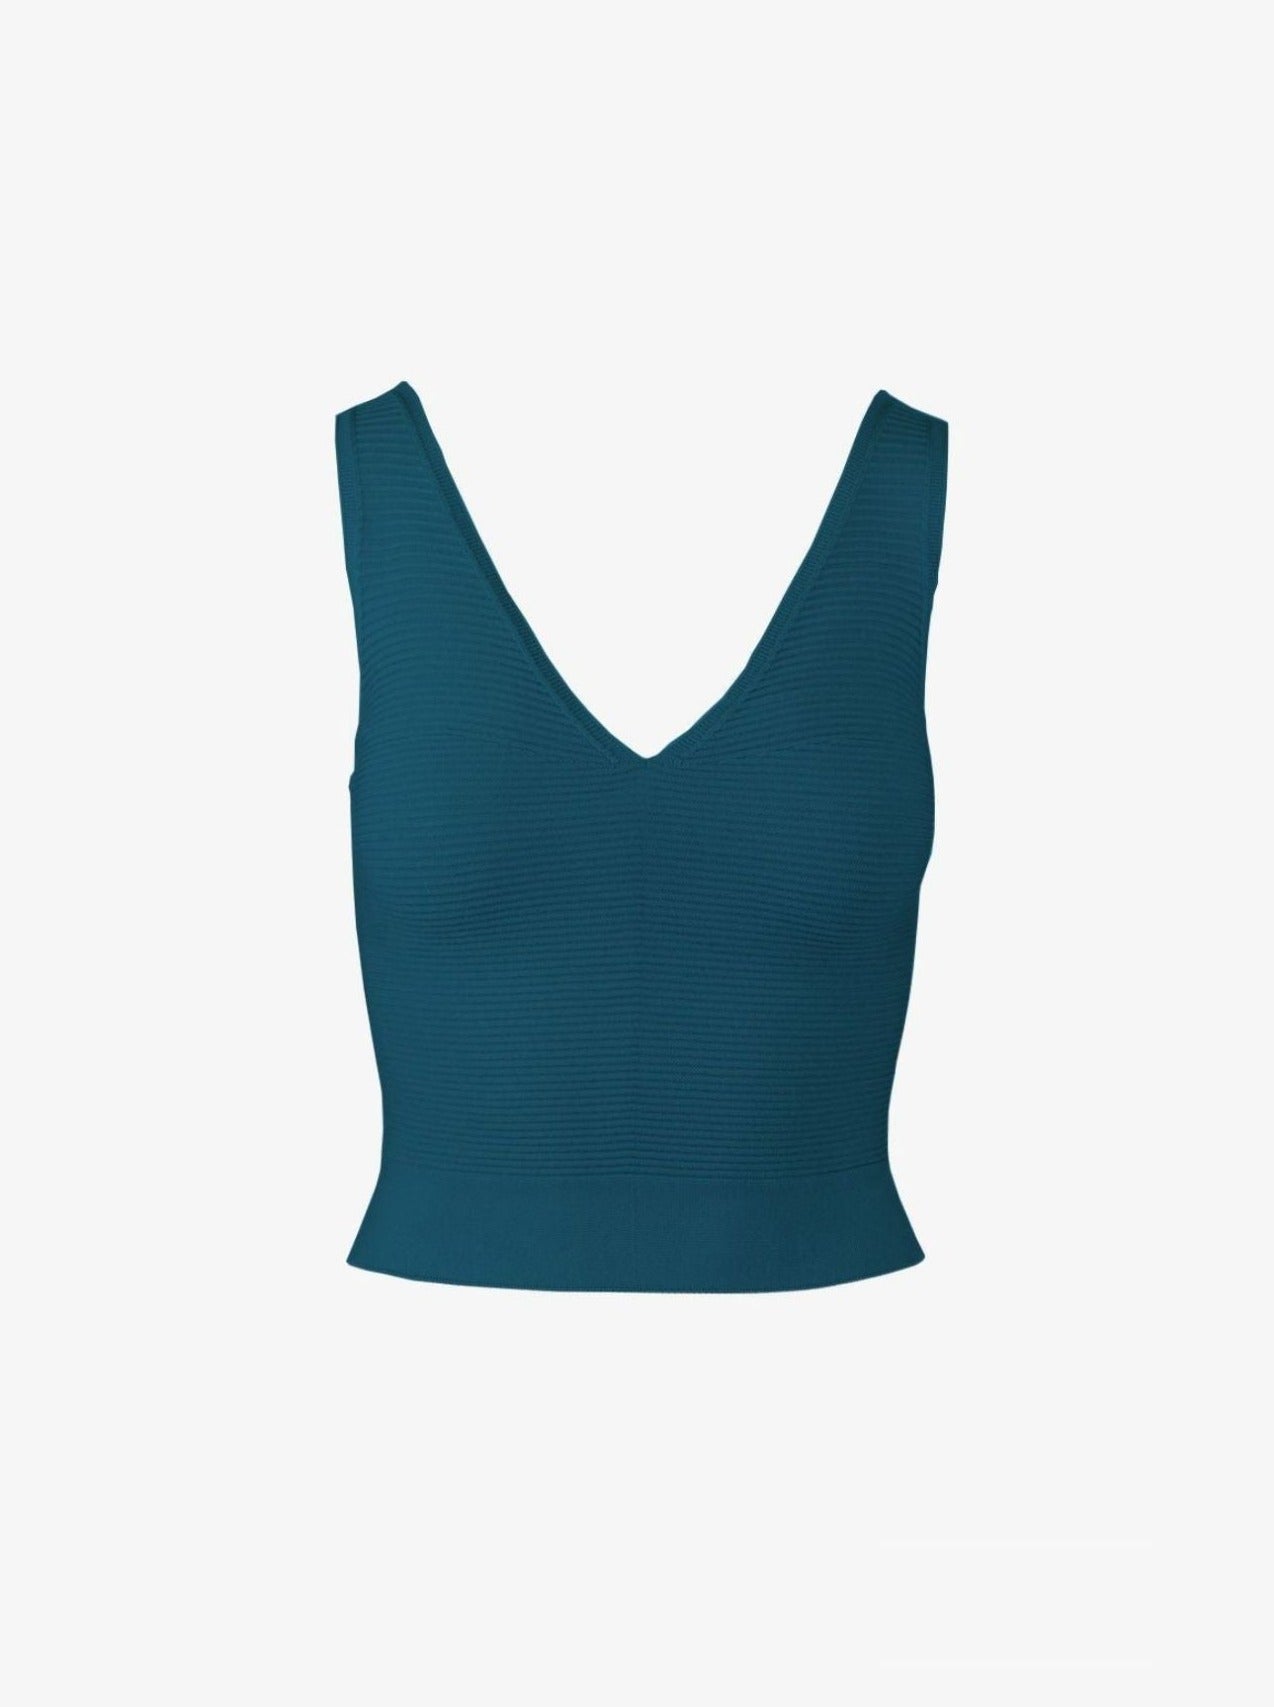 camille engineered rib tank in teal